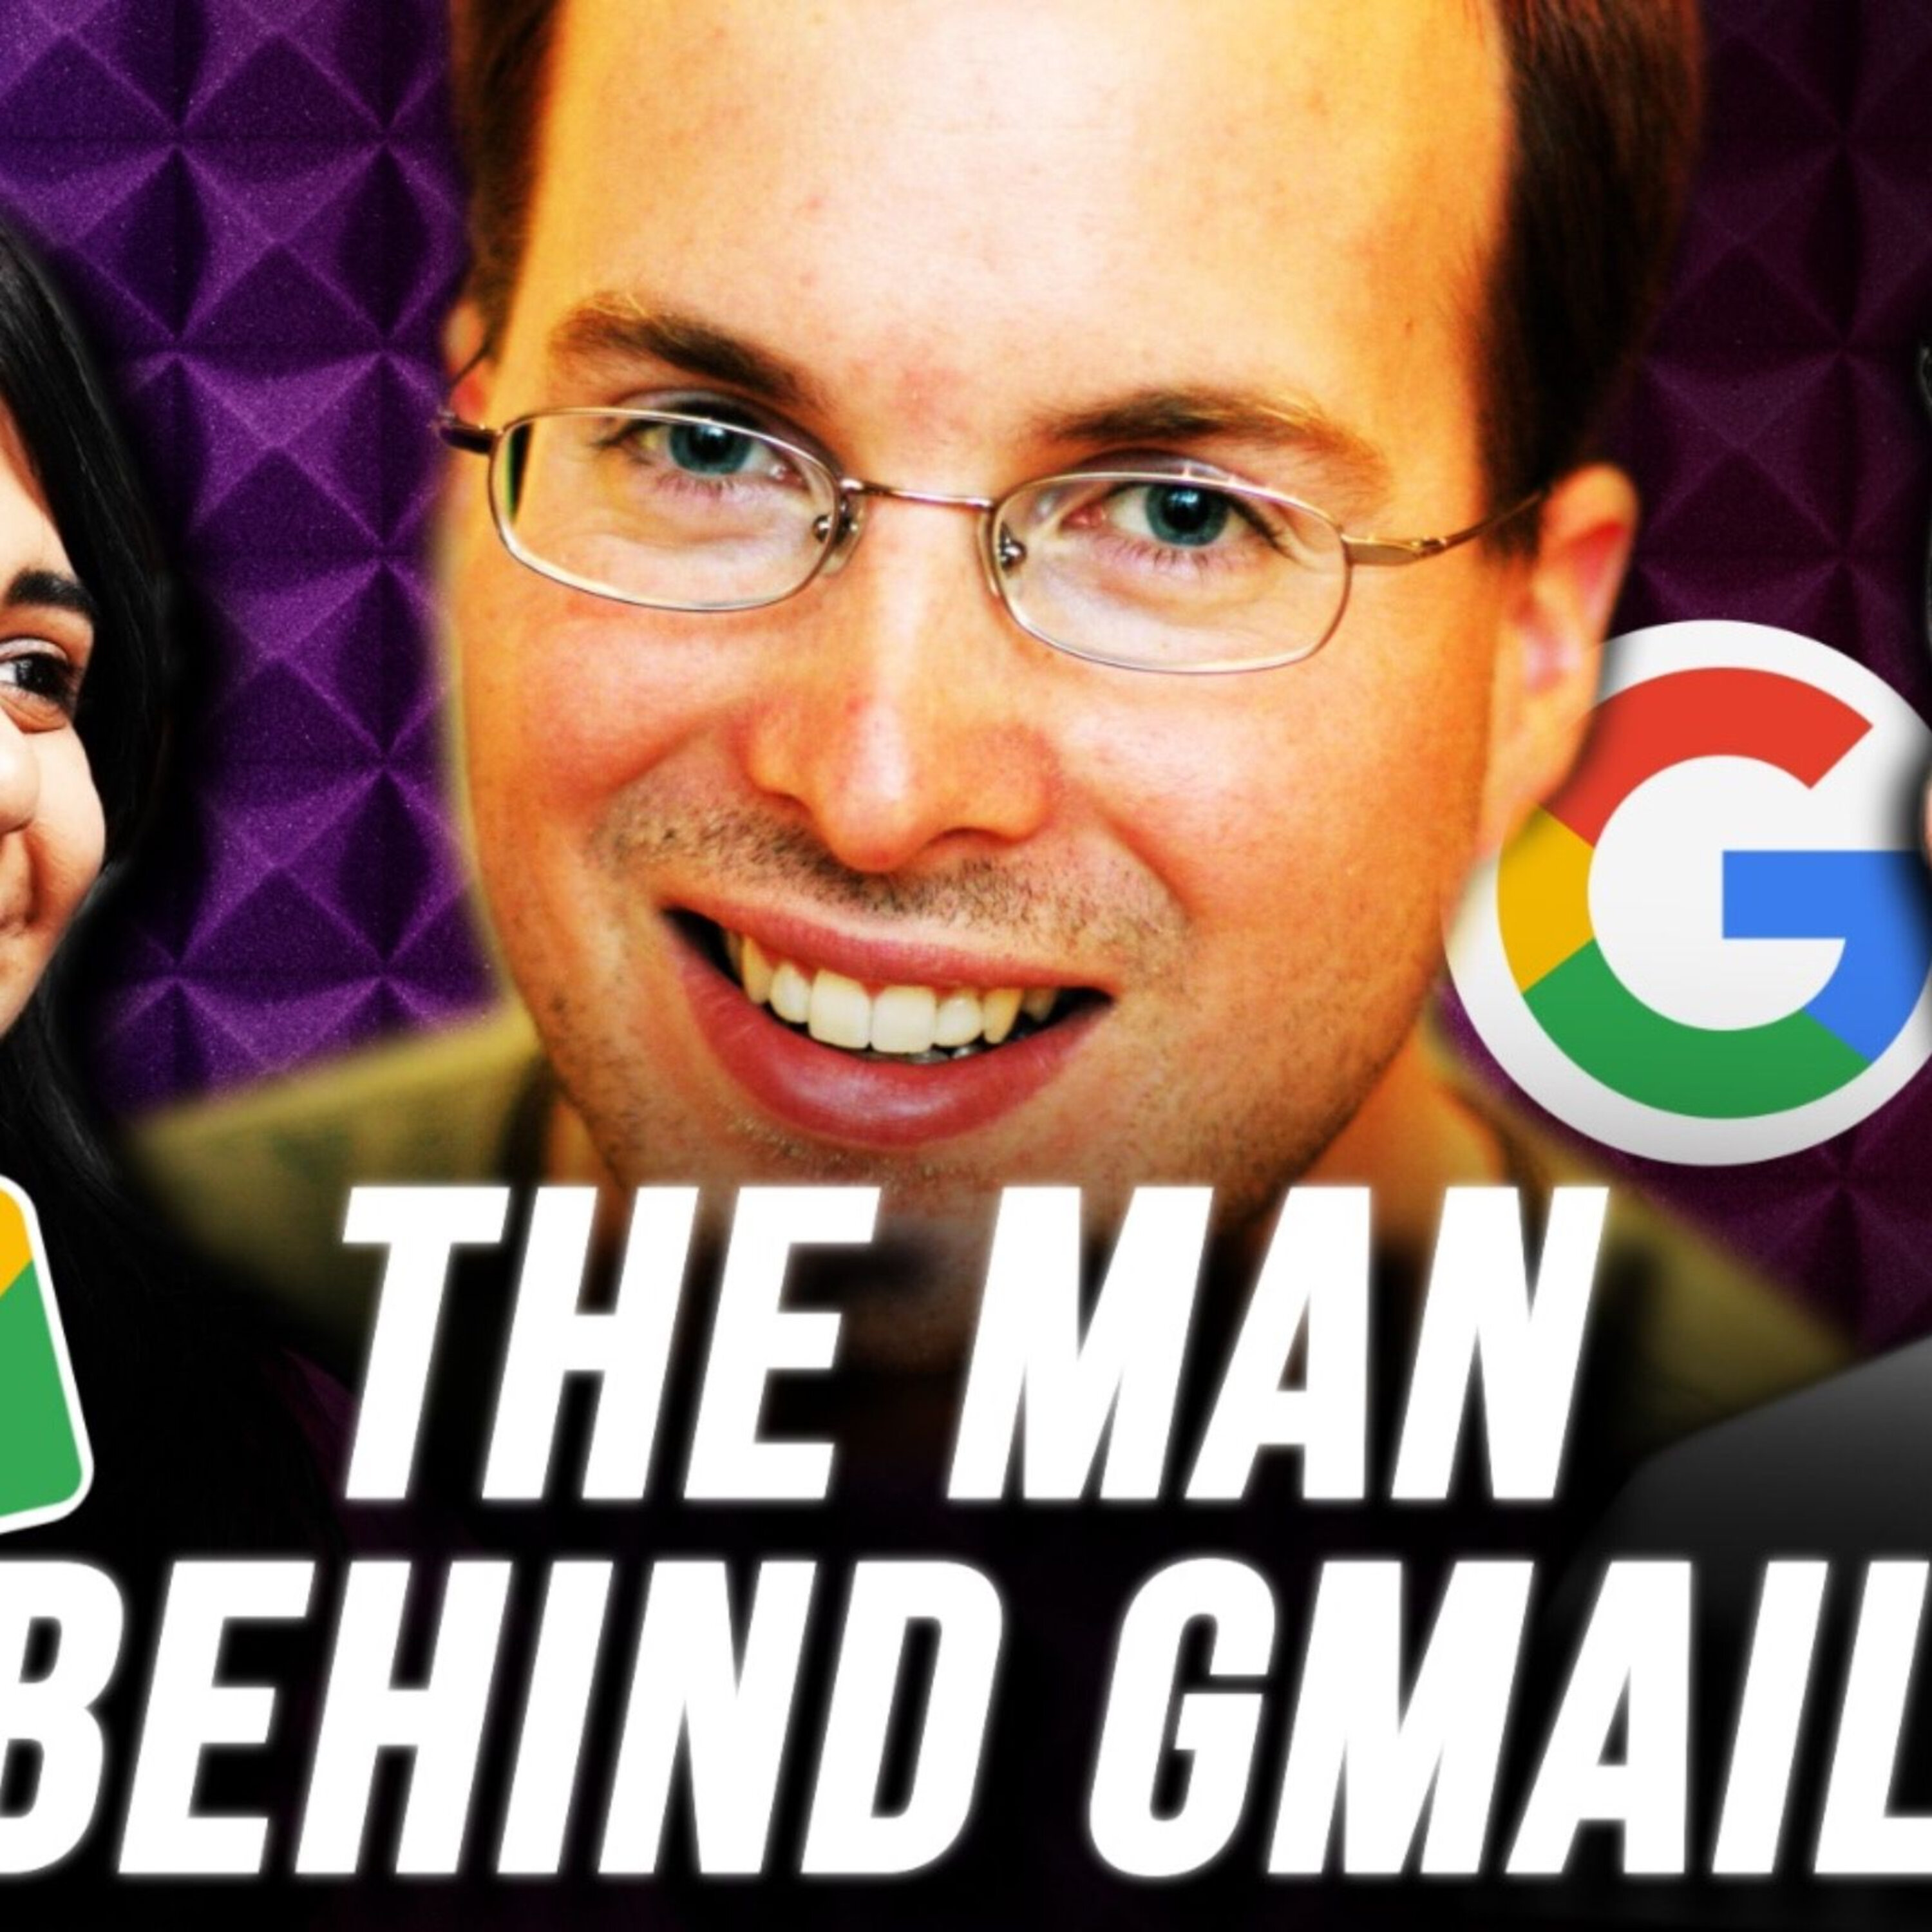 EP 40 - How Paul Buchheit Revolutionized Email with Gmail